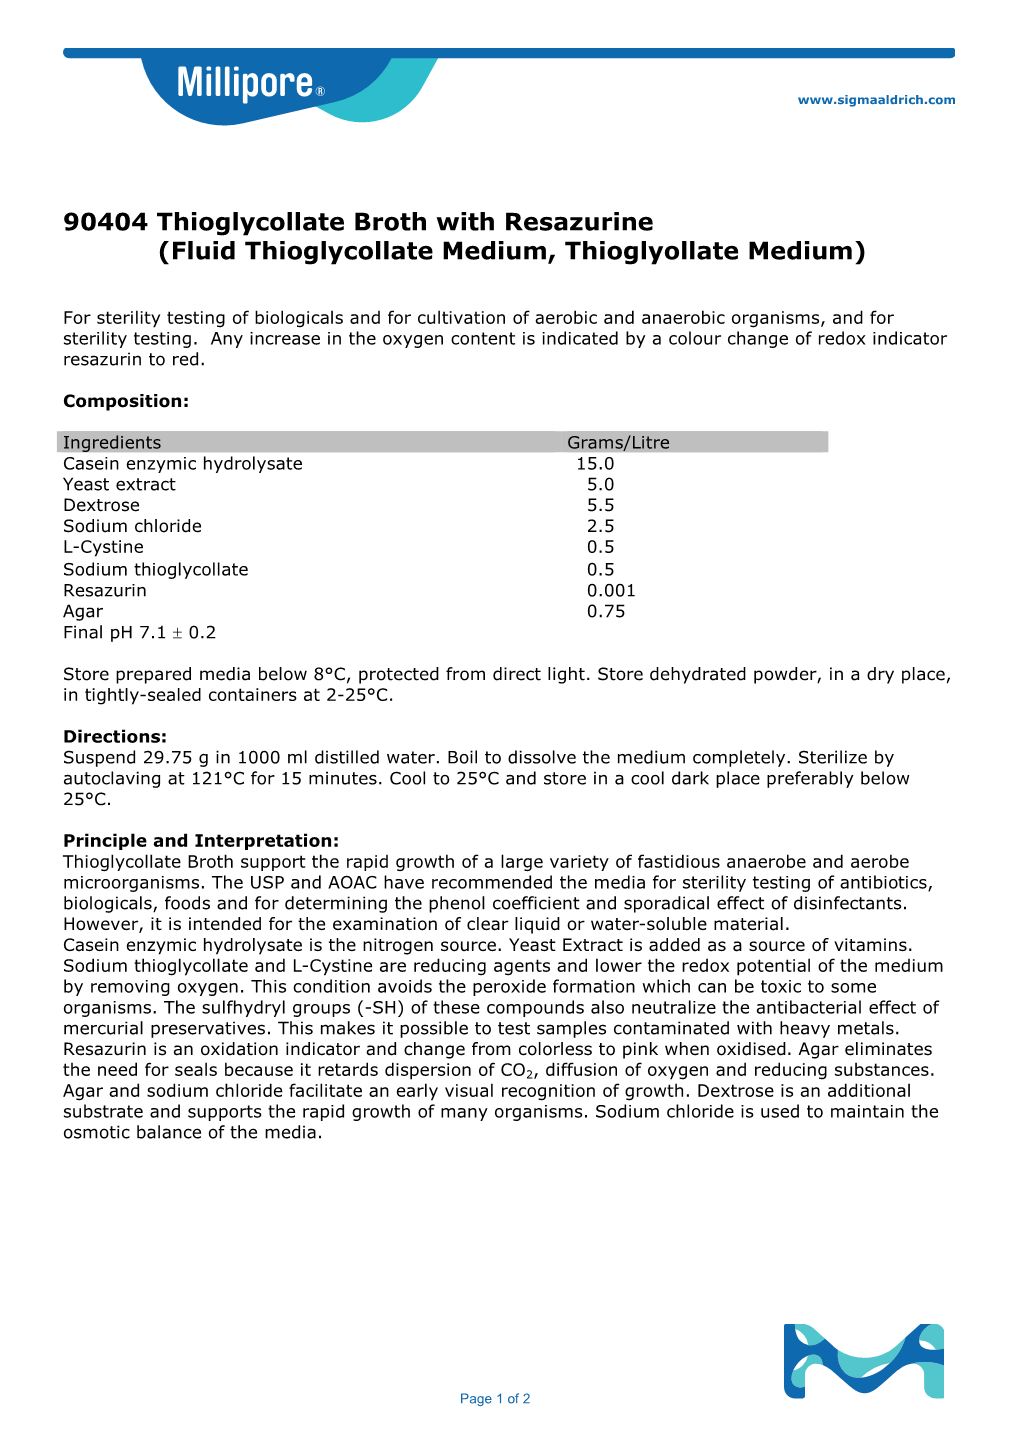 90404 Thioglycollate Broth with Resazurine (Fluid Thioglycollate Medium, Thioglyollate Medium)